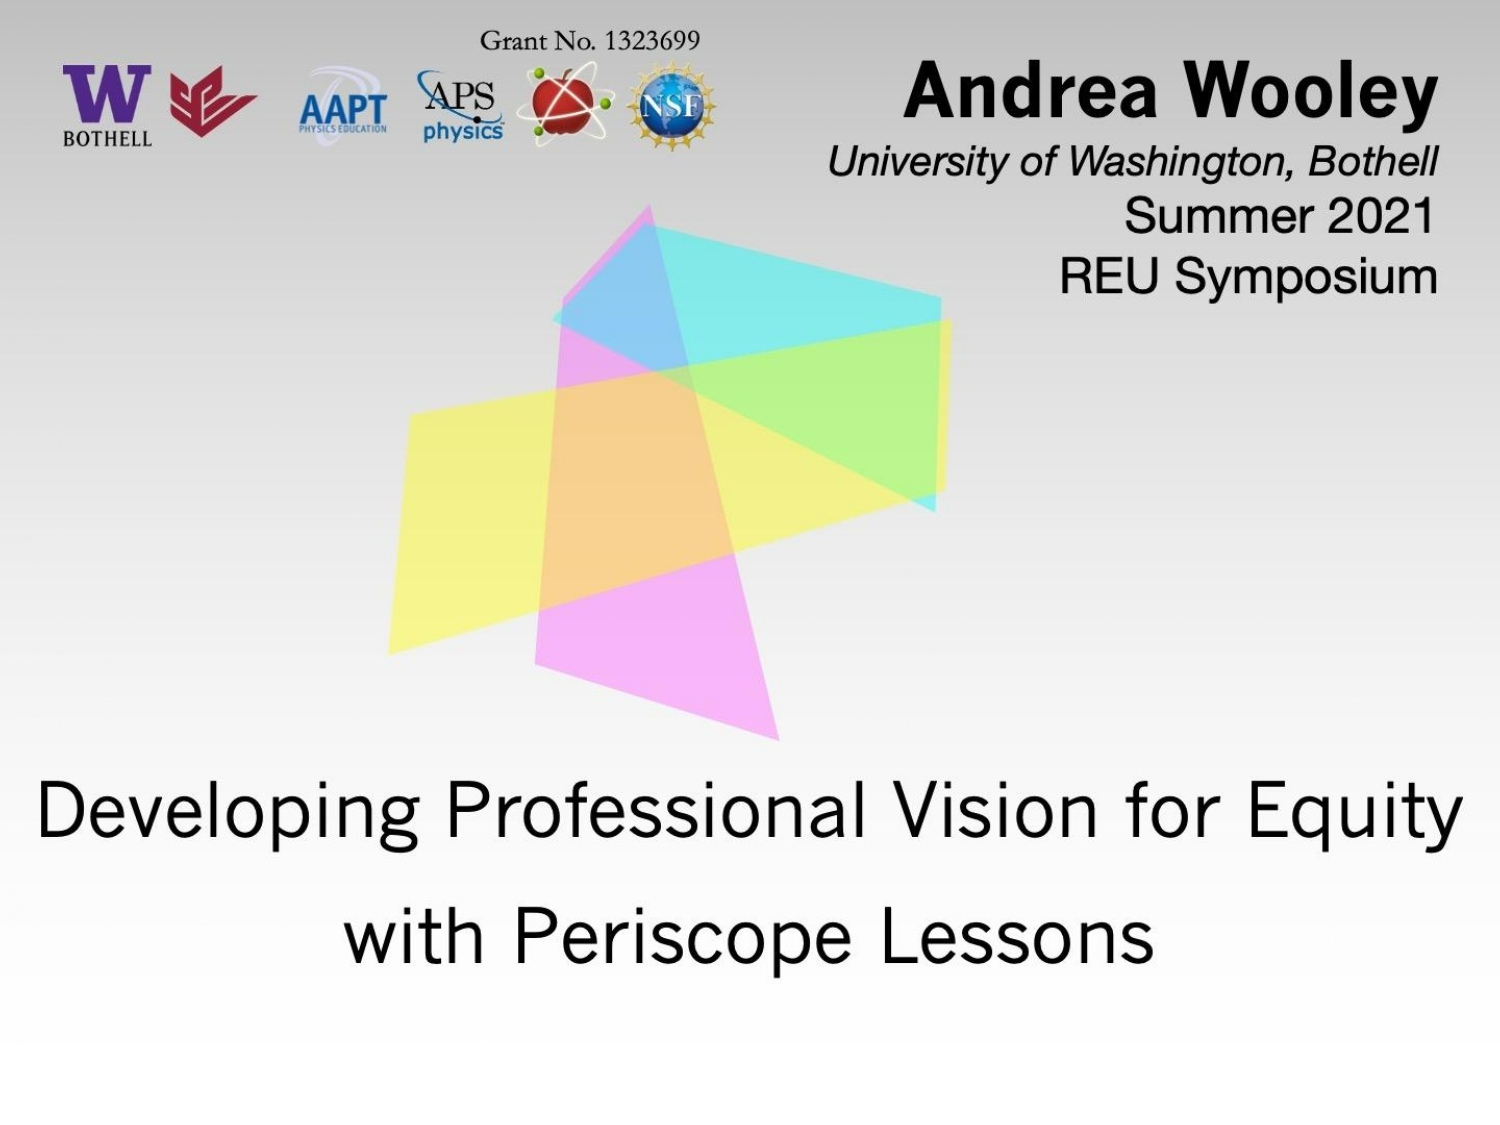 Developing Professional Vision for Equity with Periscope Lessons Poster